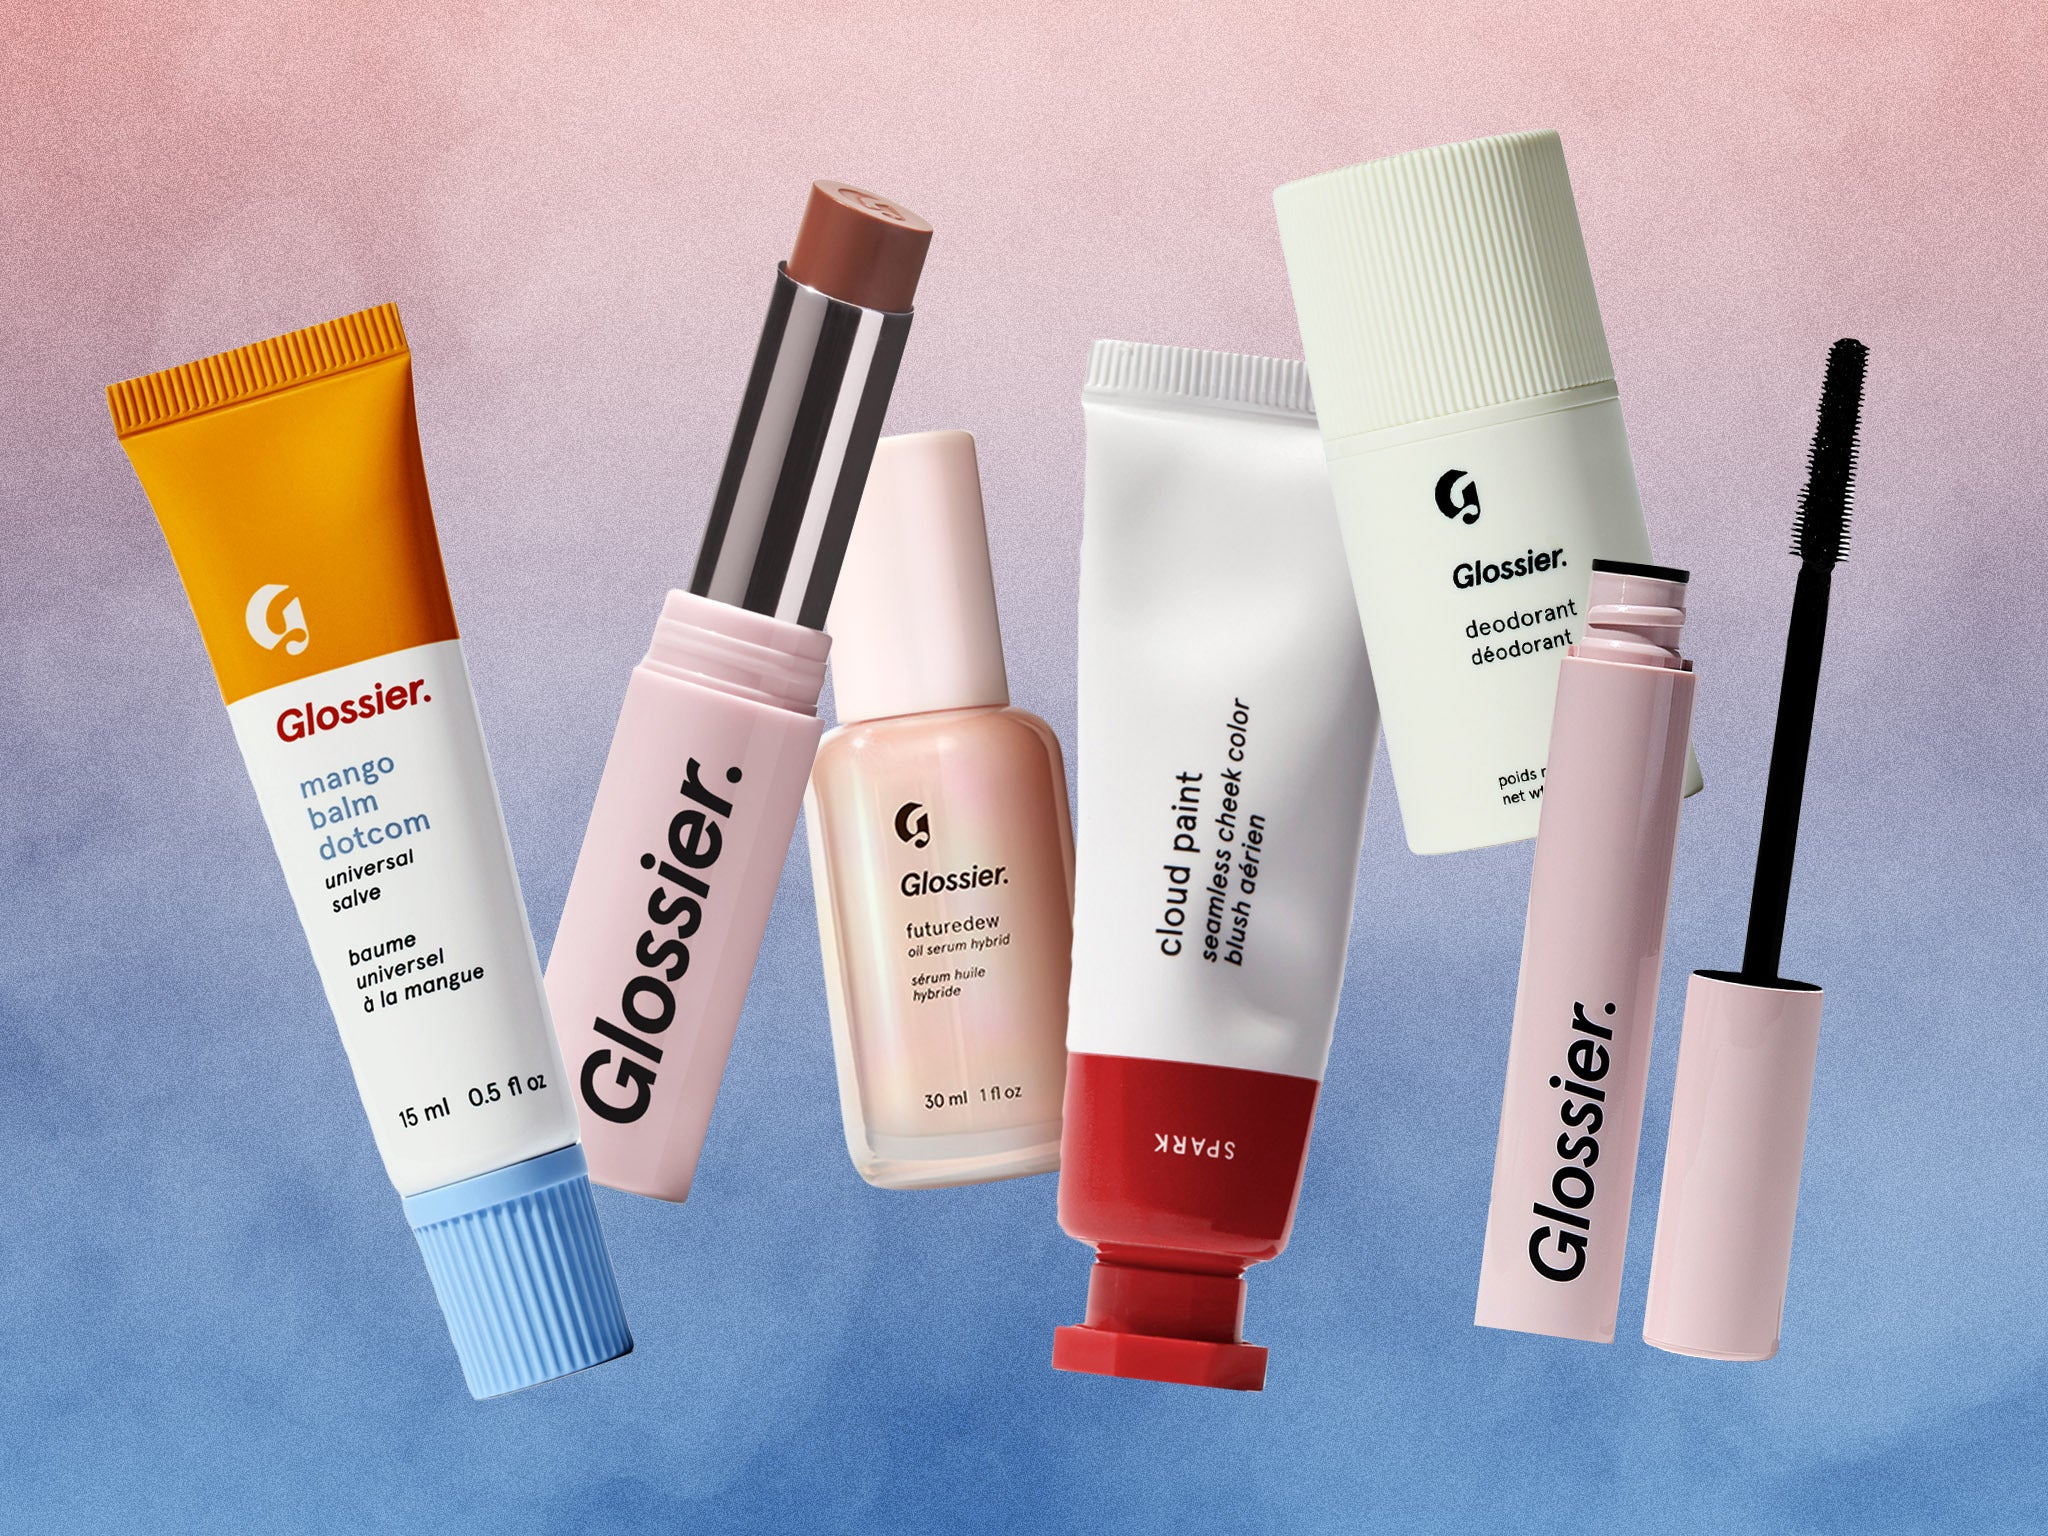 Thoughts on makeup bag? Worth it? : r/glossier